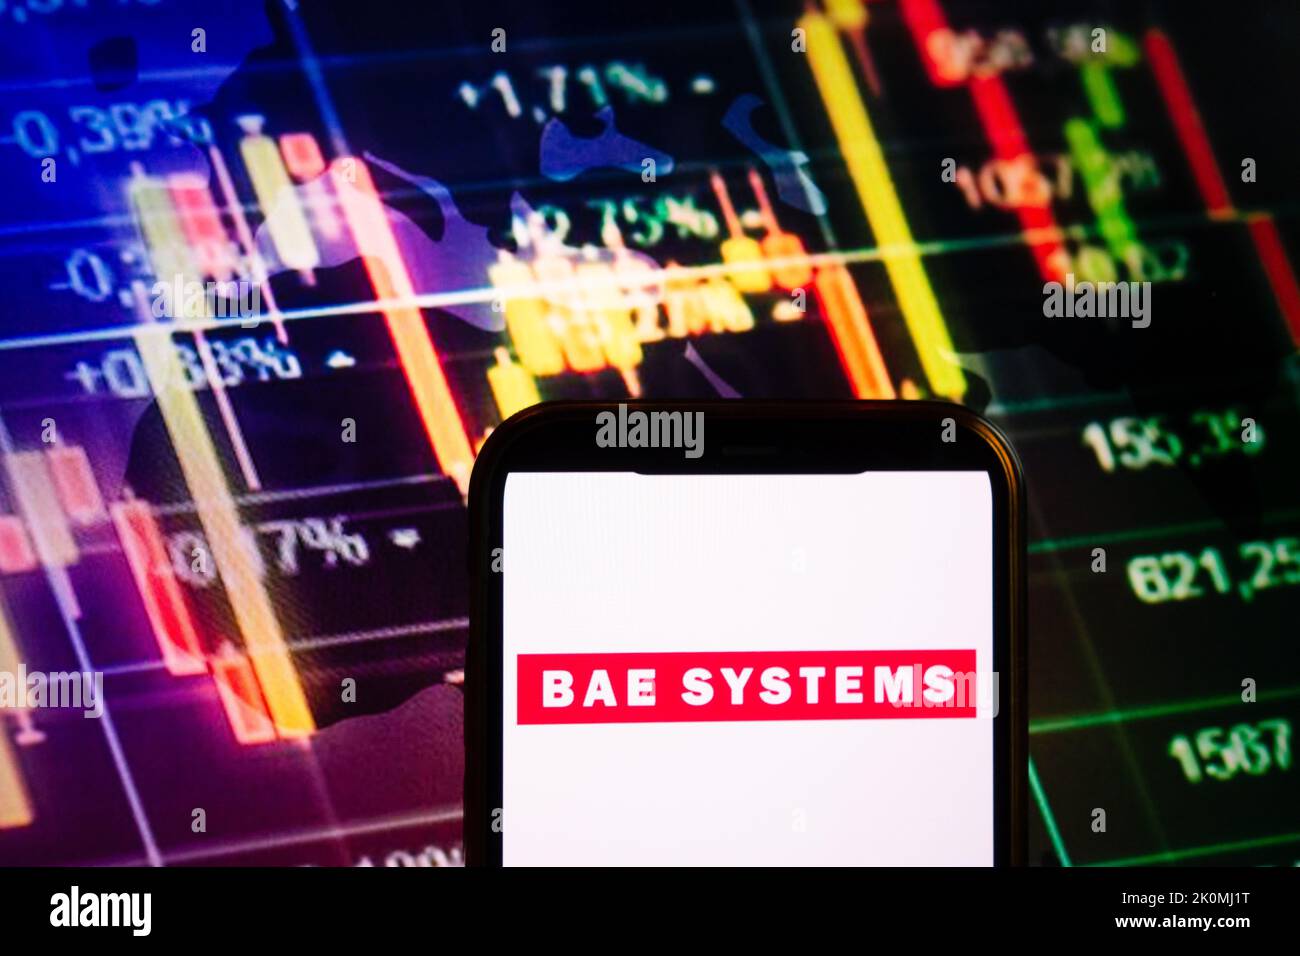 KONSKIE, POLAND - September 10, 2022: Smartphone displaying logo of BAE Systems company on stock exchange diagram background Stock Photo